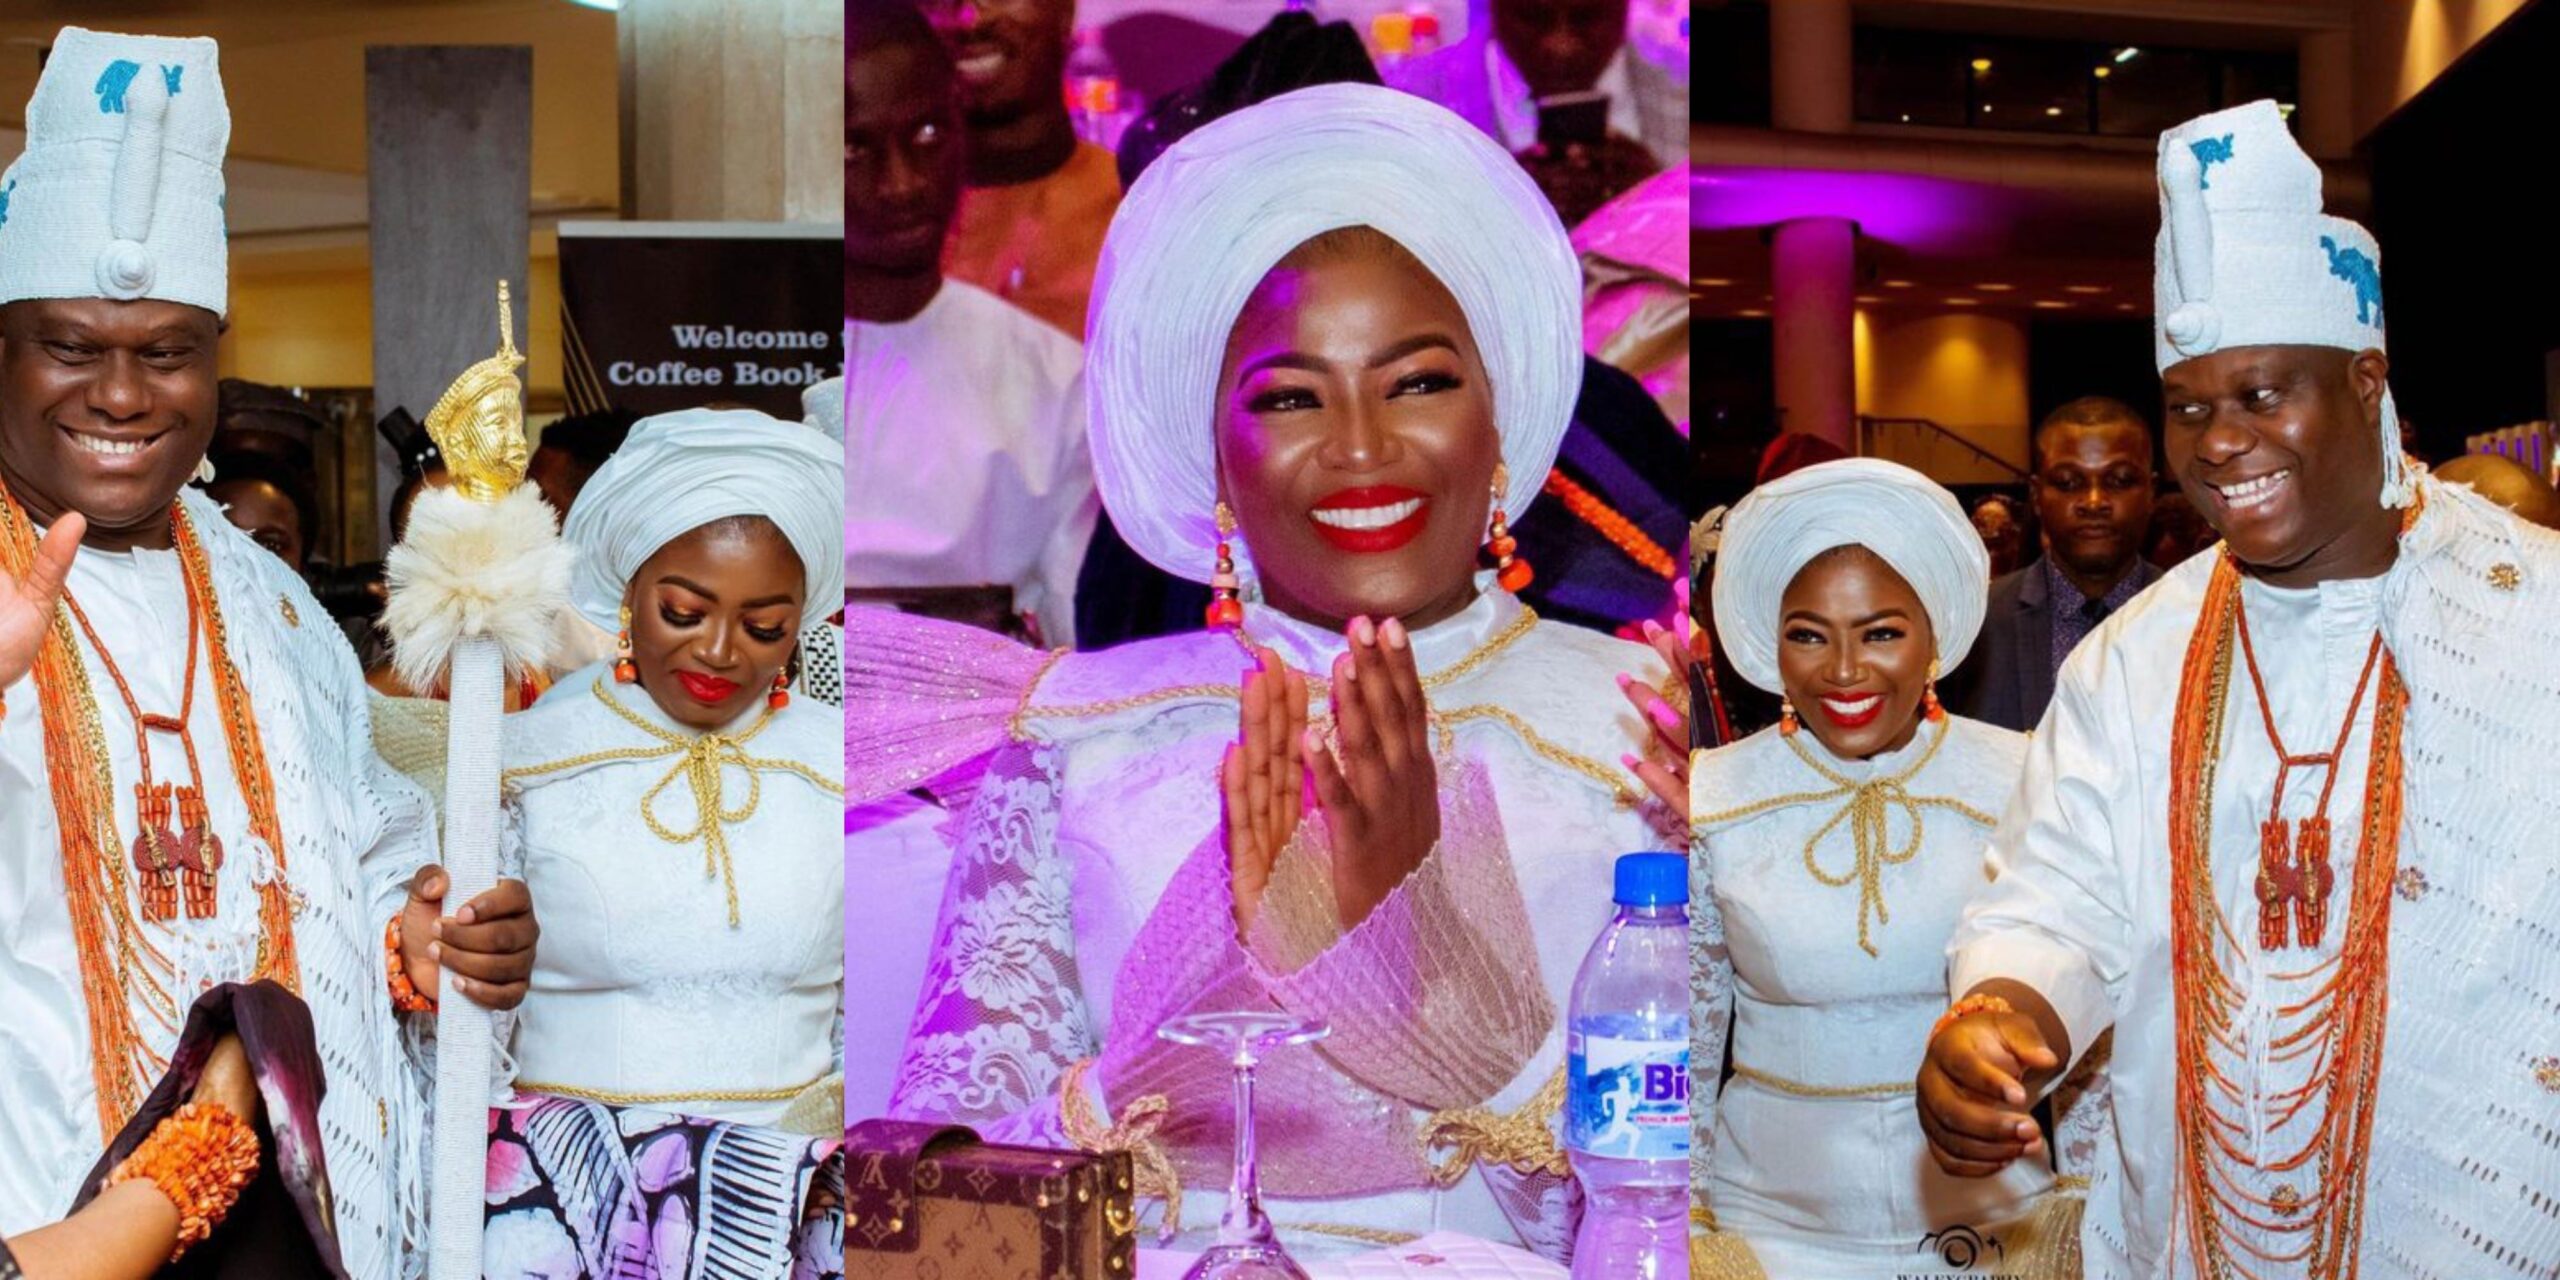 “The loving husband behind my happiness and smile” Queen Ashley melts hearts as she pours out her coronary heart to the Ooni